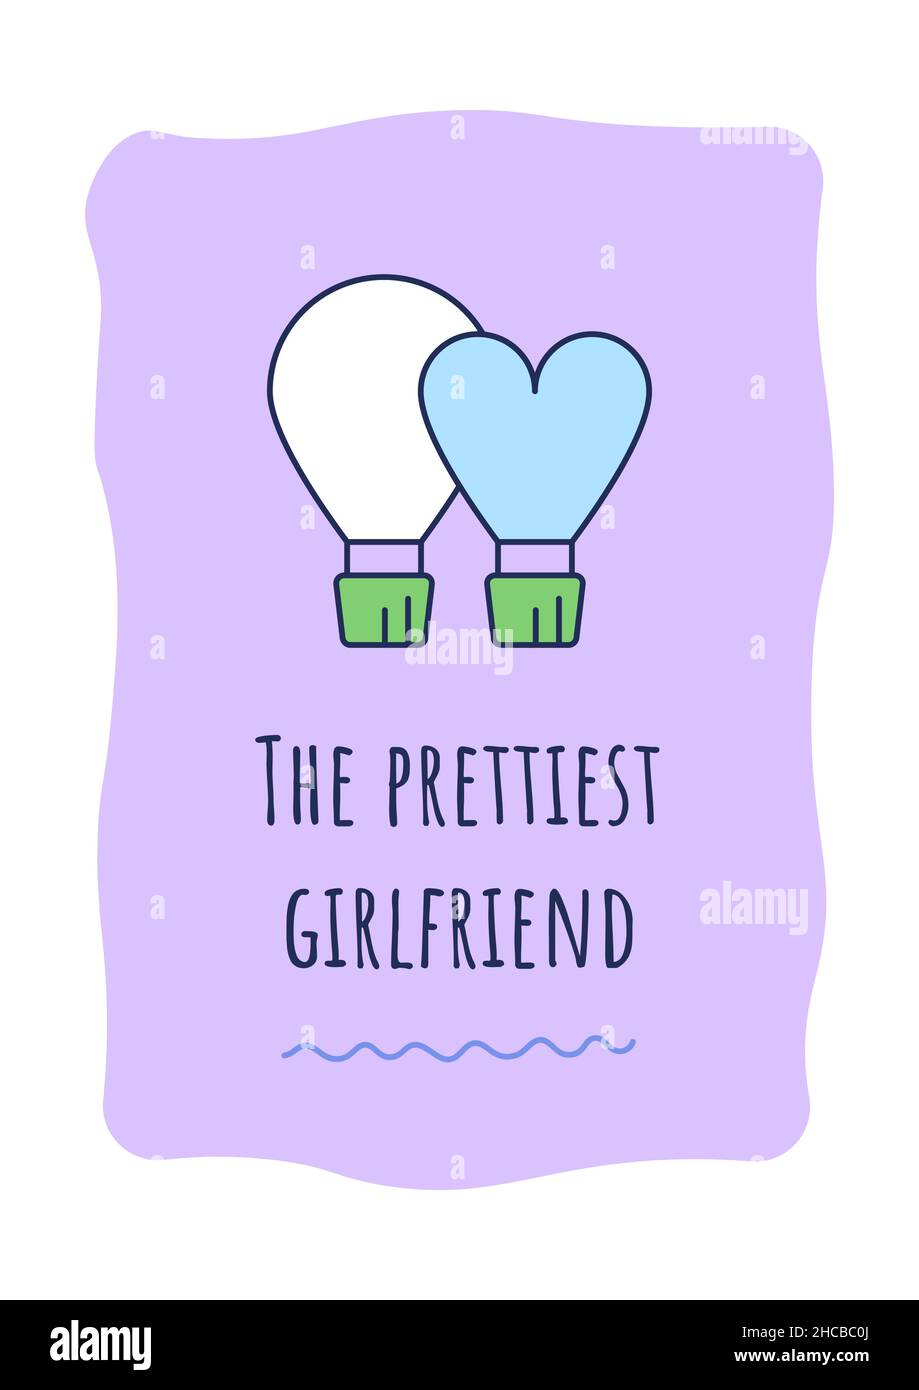 Prettiest girlfriend greeting card with color icon element Stock Vector